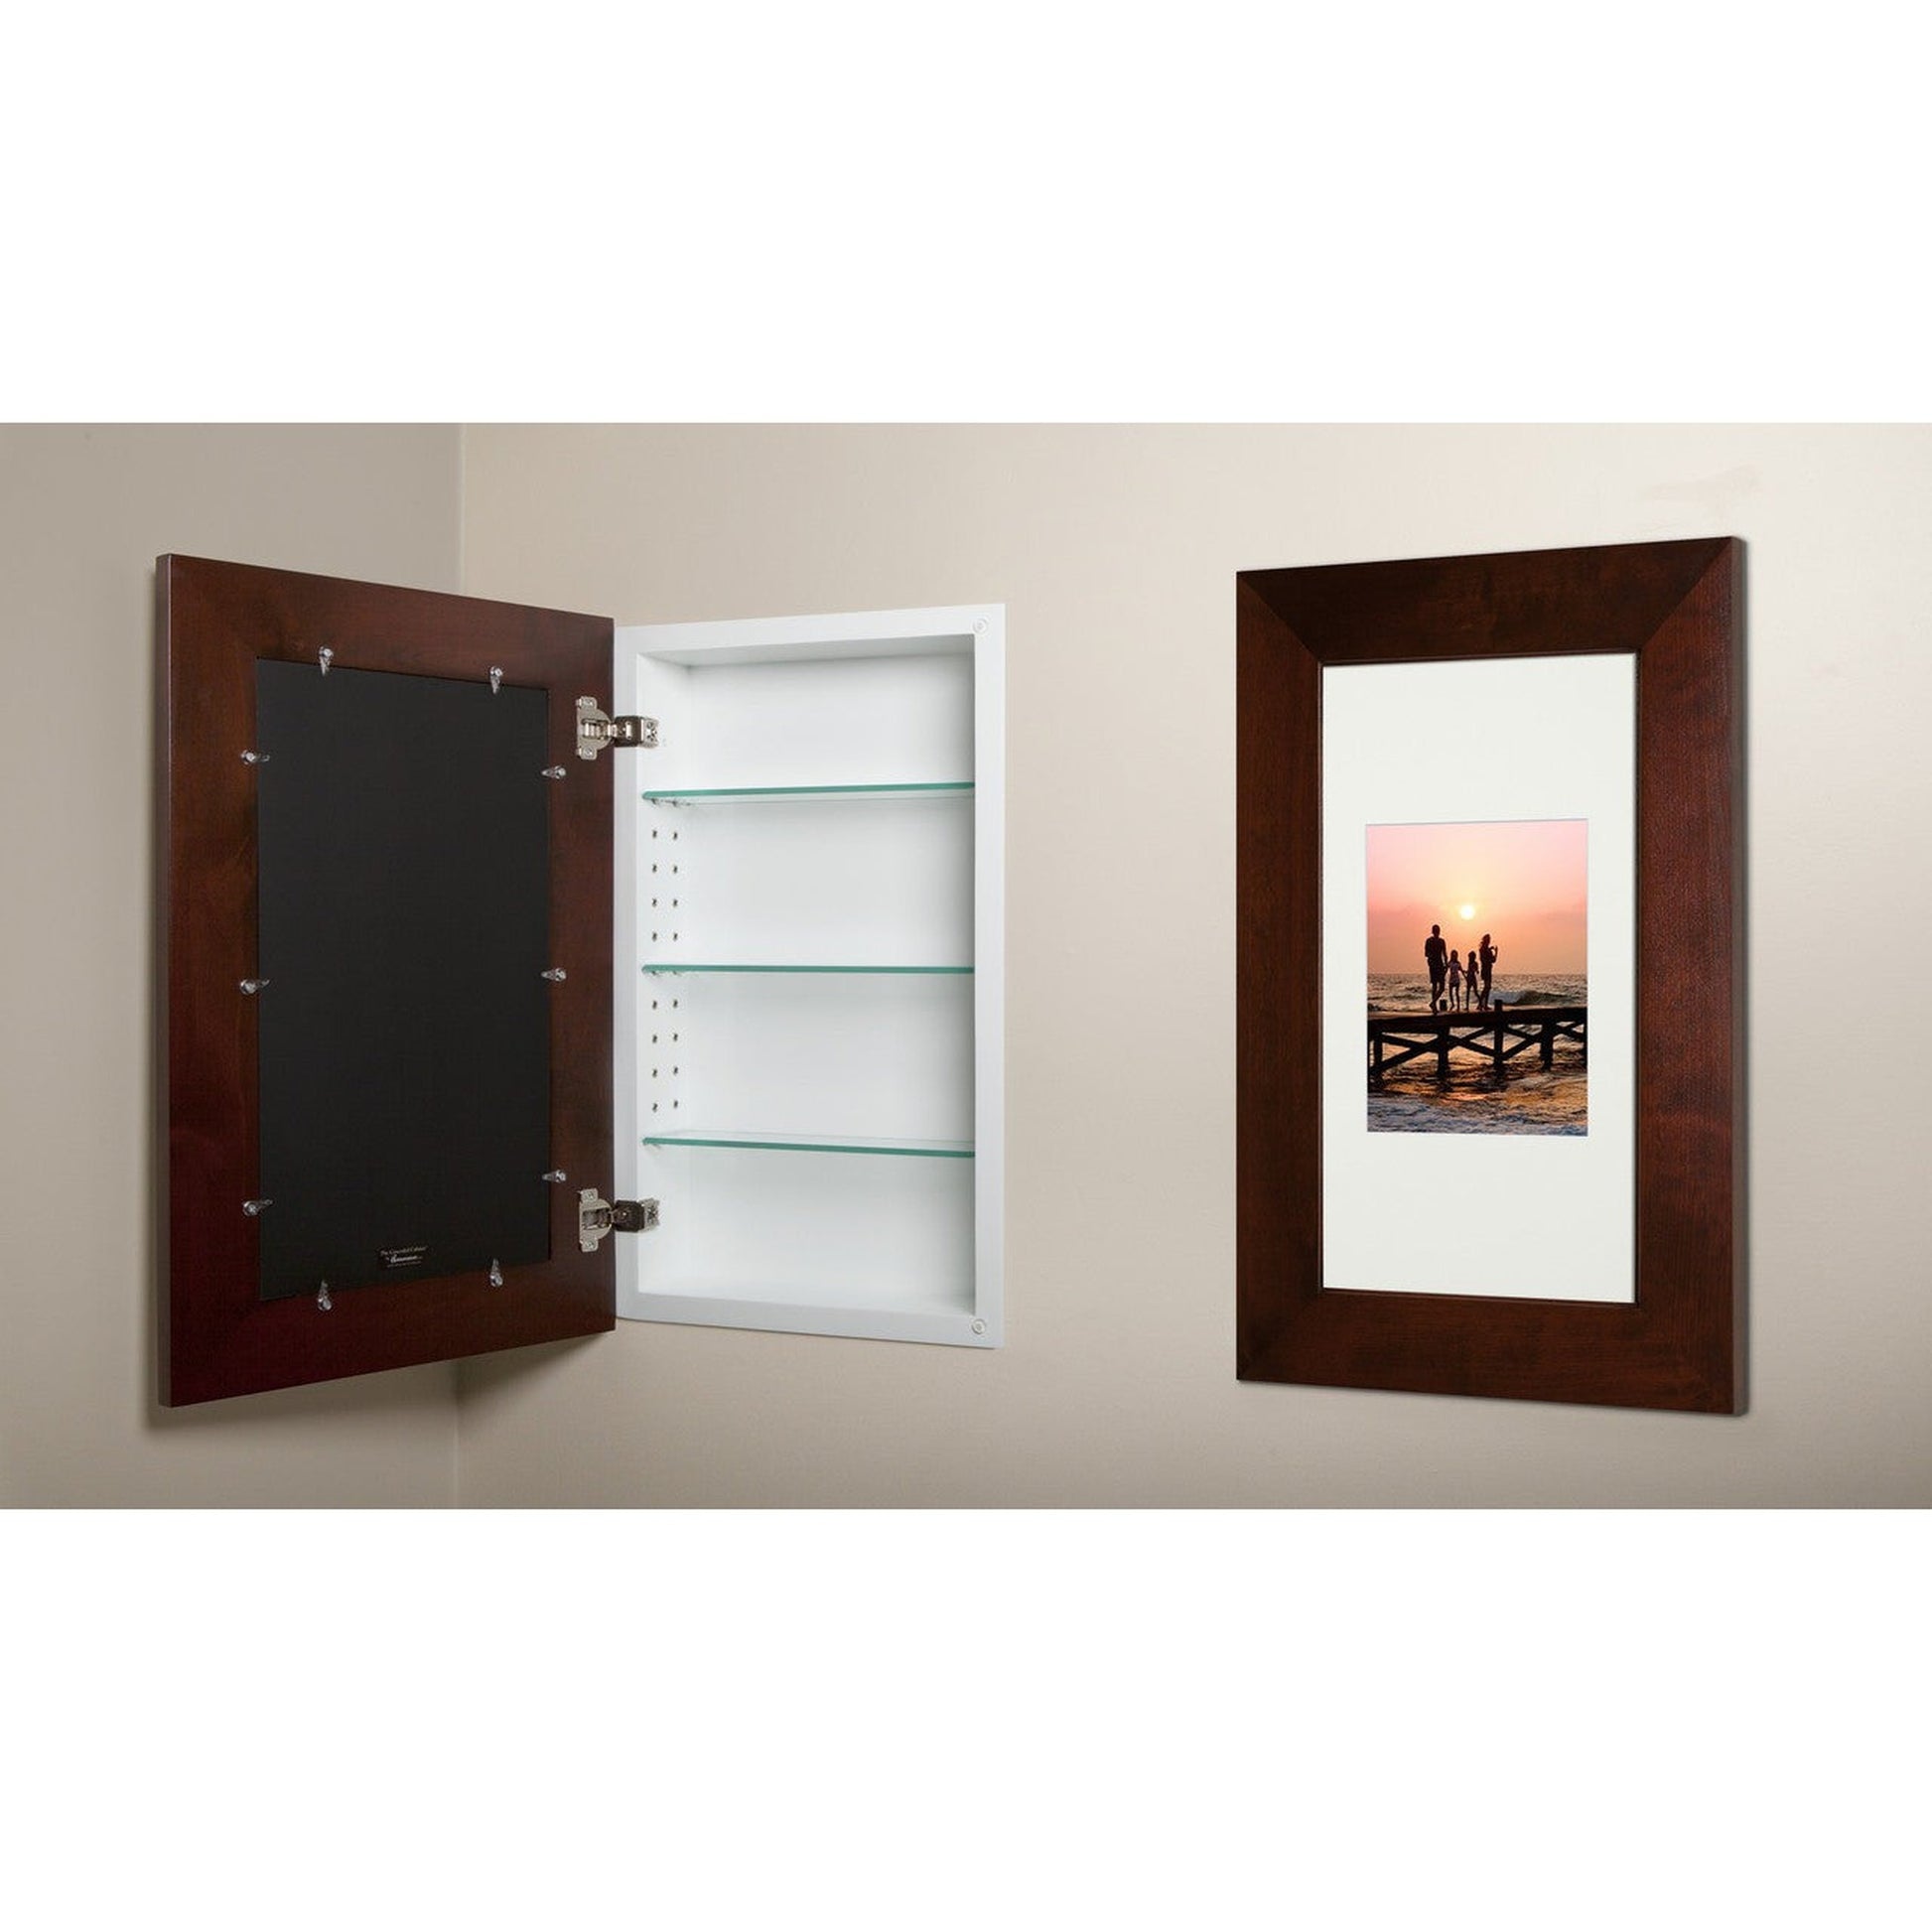 Fox Hollow Furnishings 14" x 24" Espresso Extra Large Special 6" Depth White Interior Recessed Picture Frame Medicine Cabinet With Mirror and White Three Opening Matting